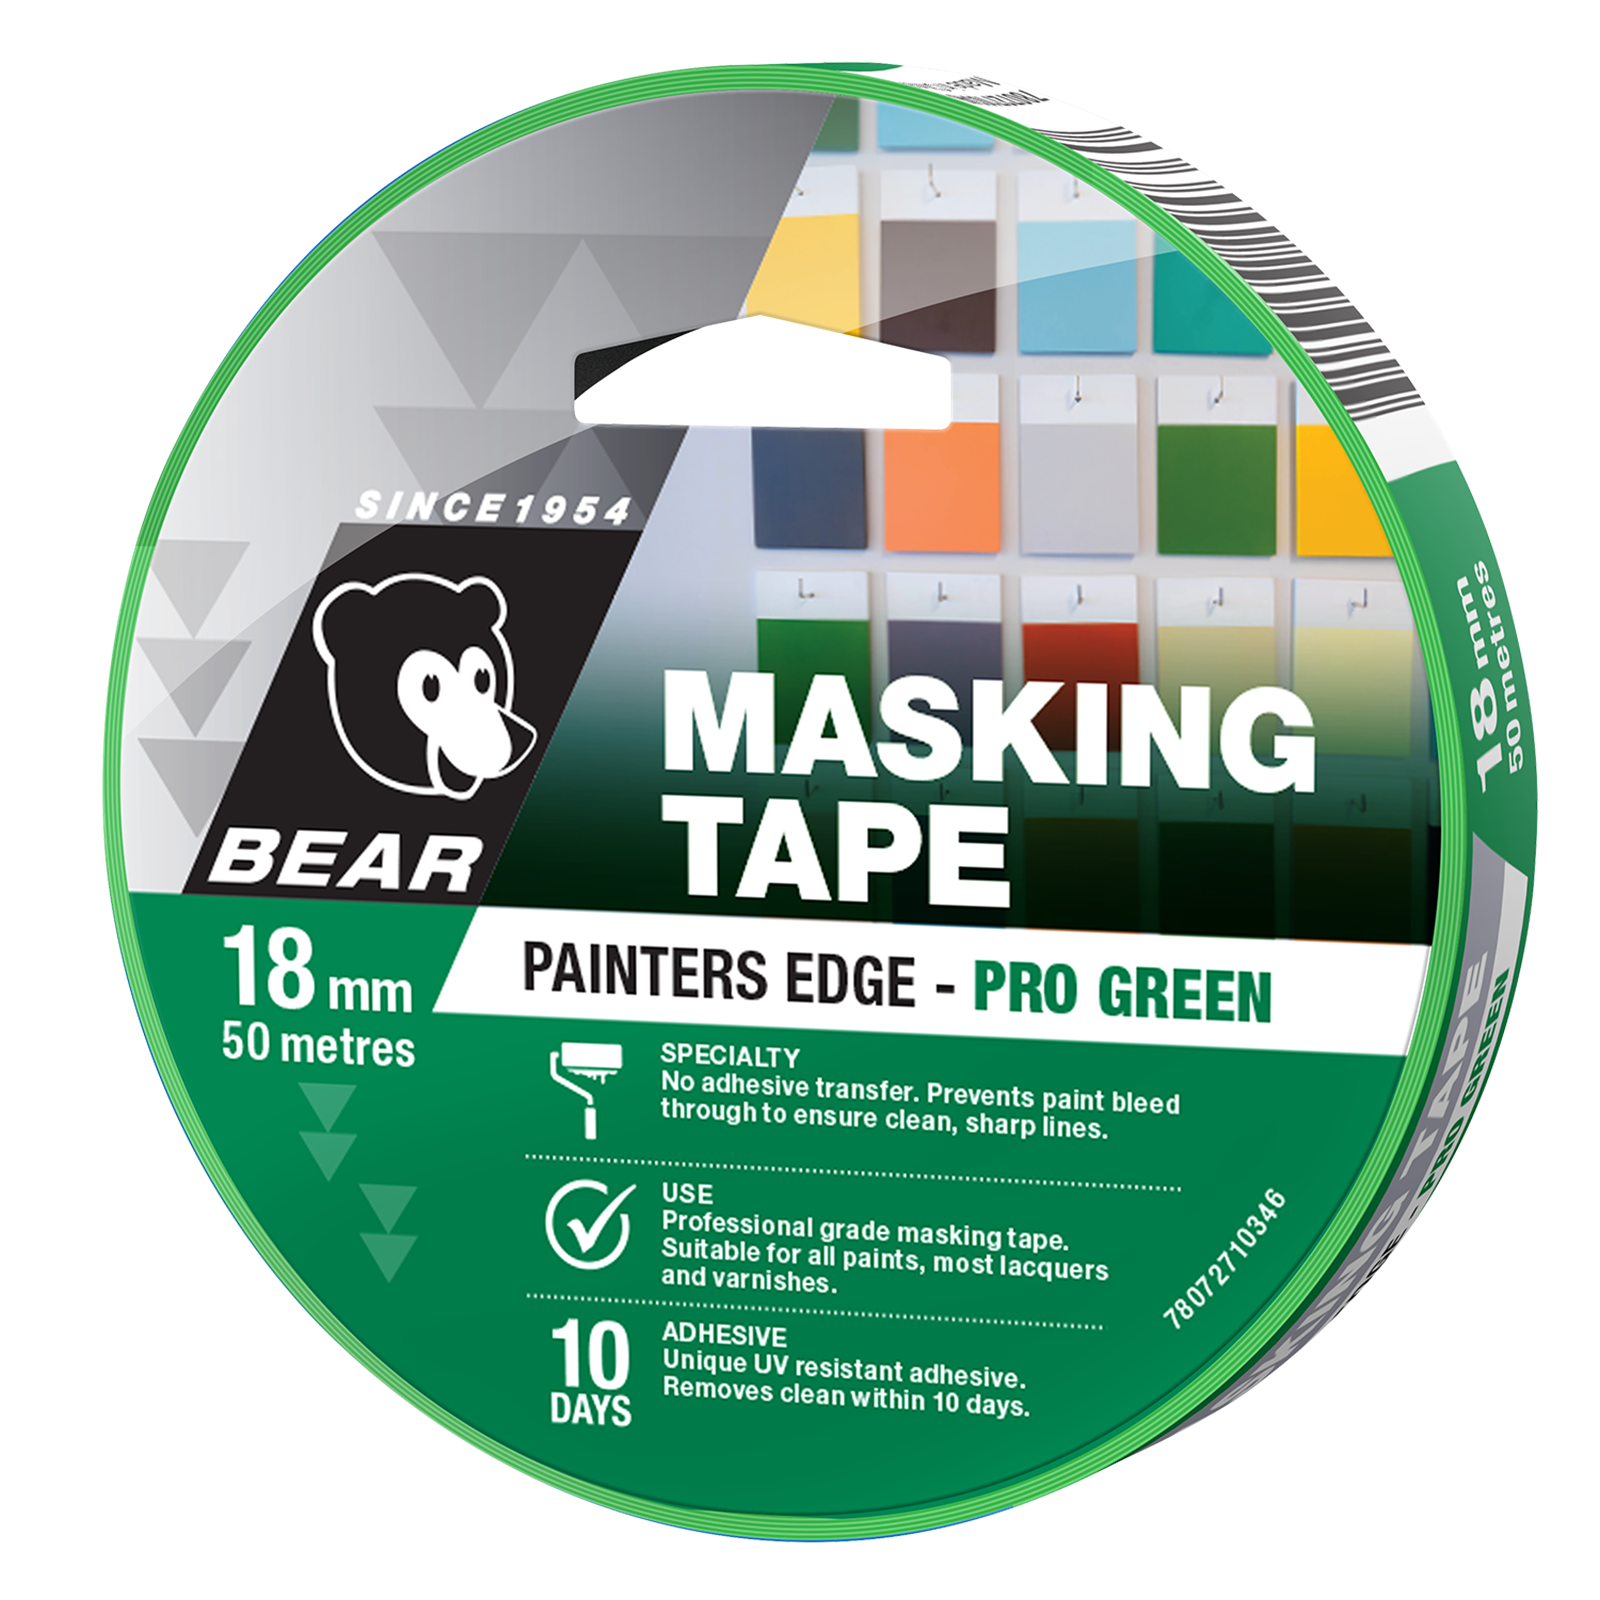 WS Invisible Tape 18mm x 33m